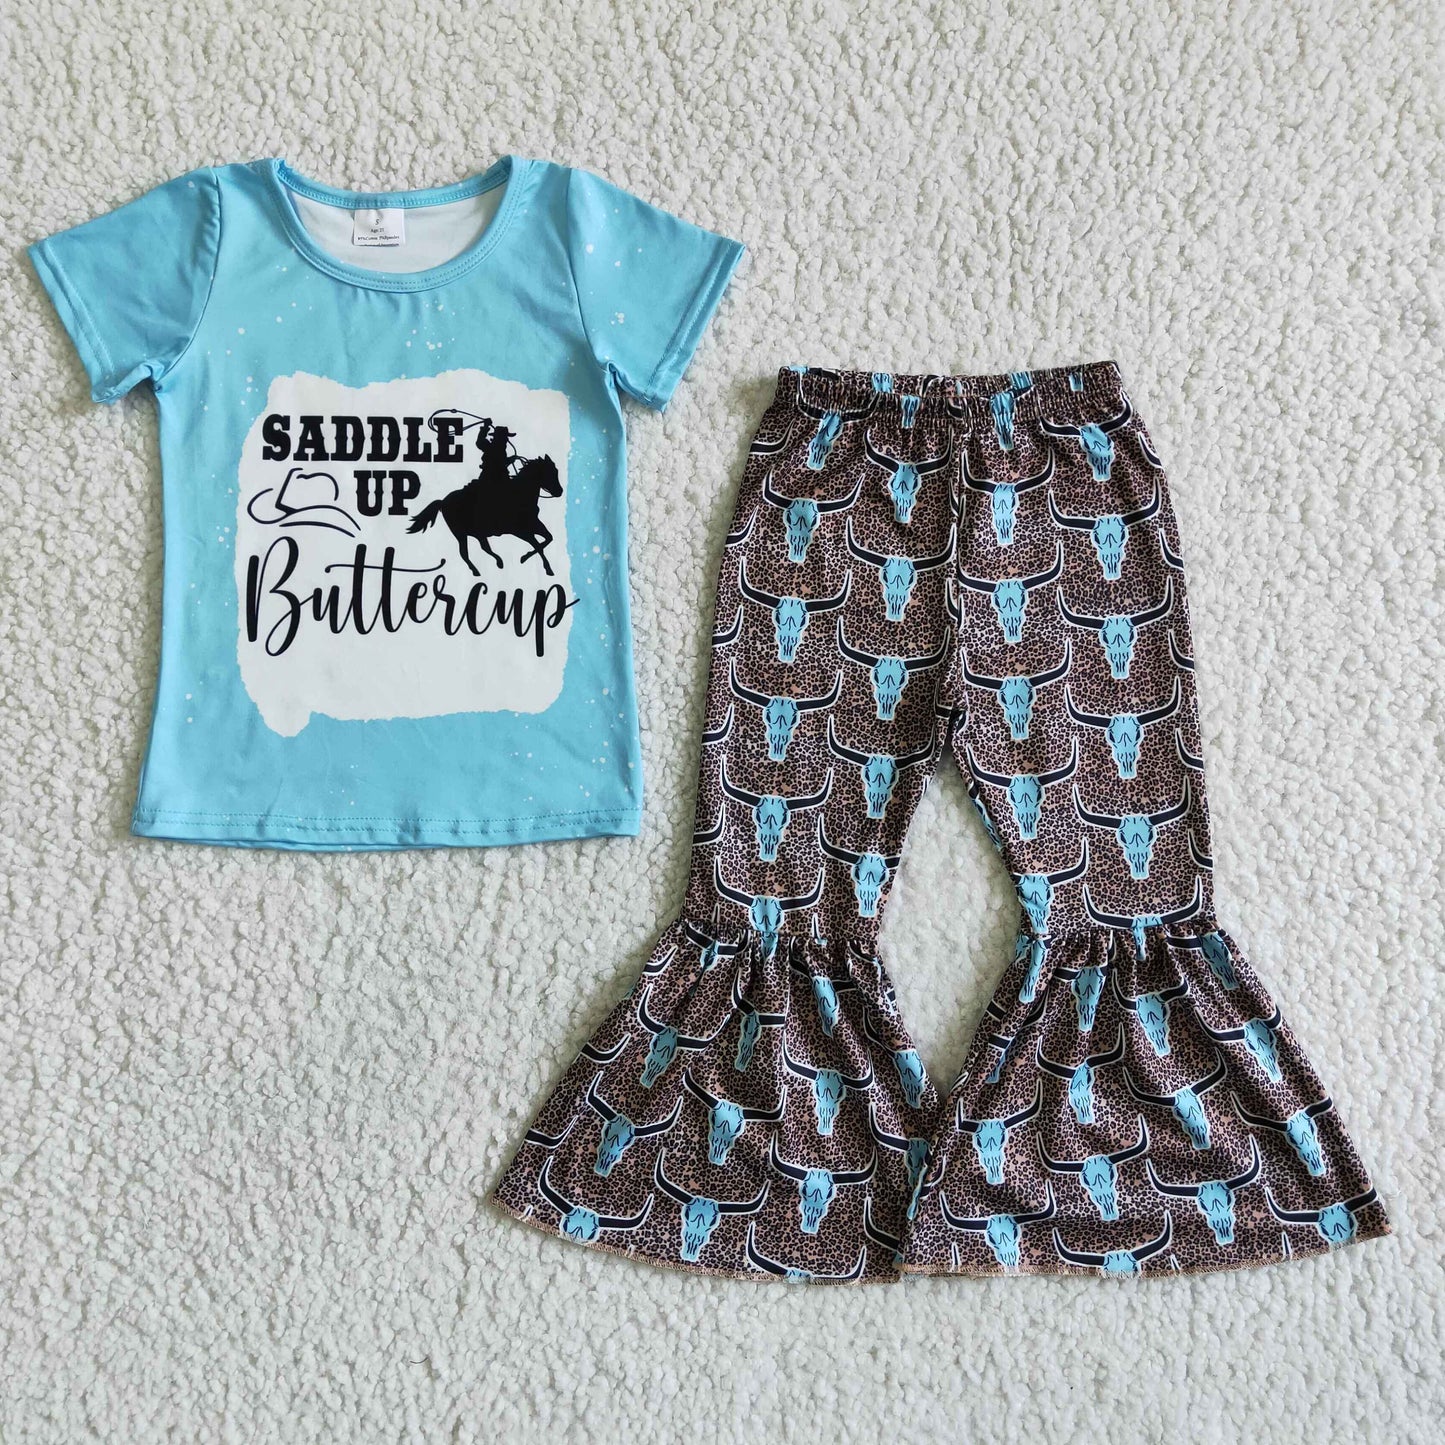 Baby girls blue bleach letter printed top heifer print pants outfit C5-27